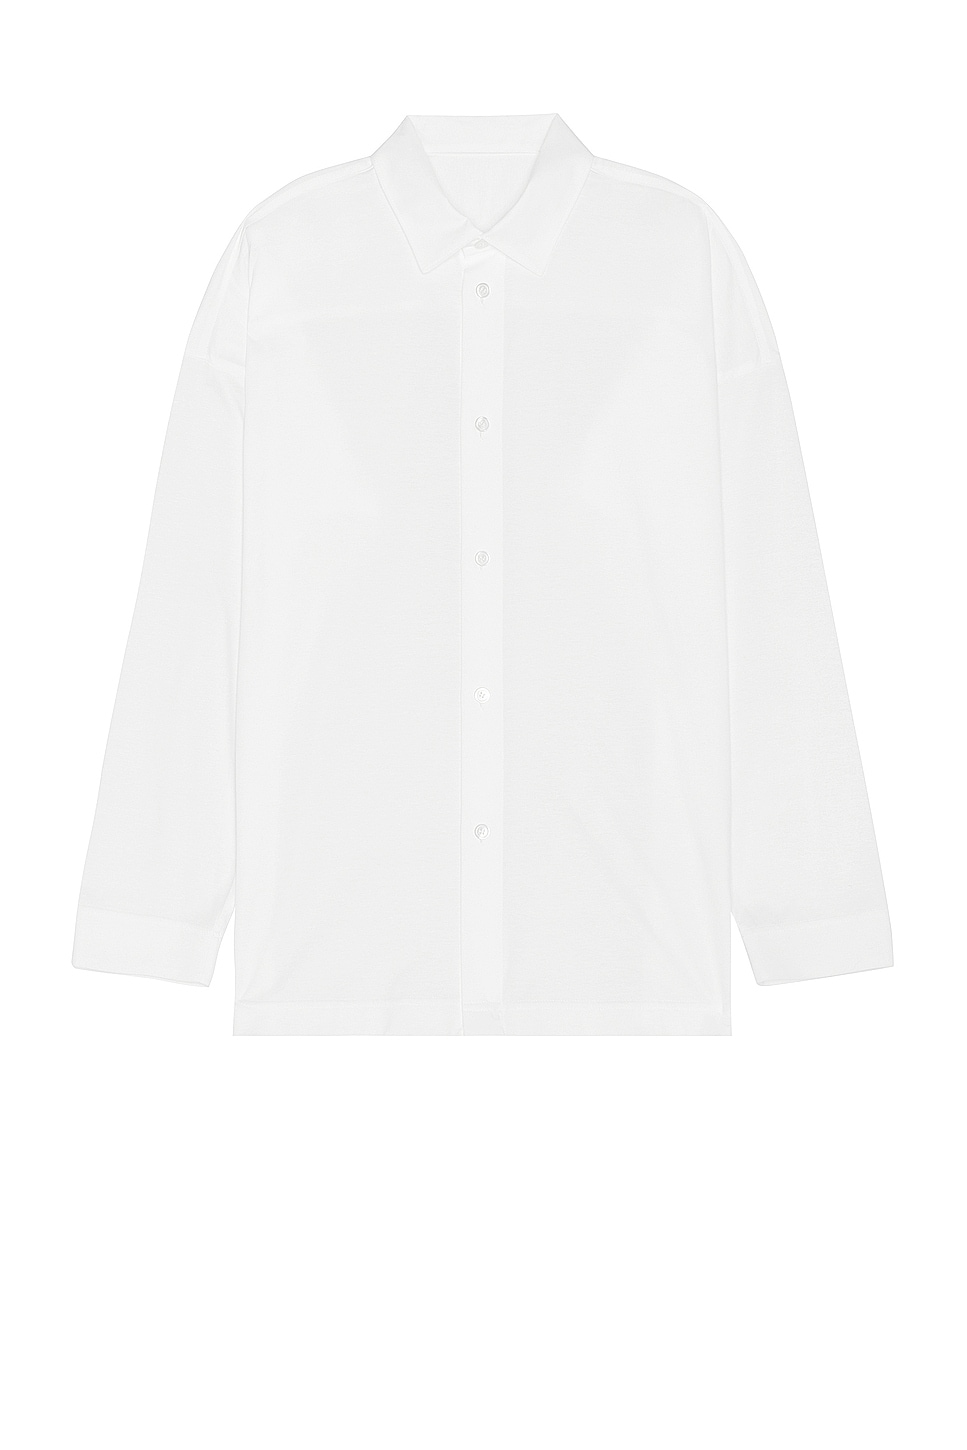 Image 1 of Homme Plisse Issey Miyake Jersey Shirt in White